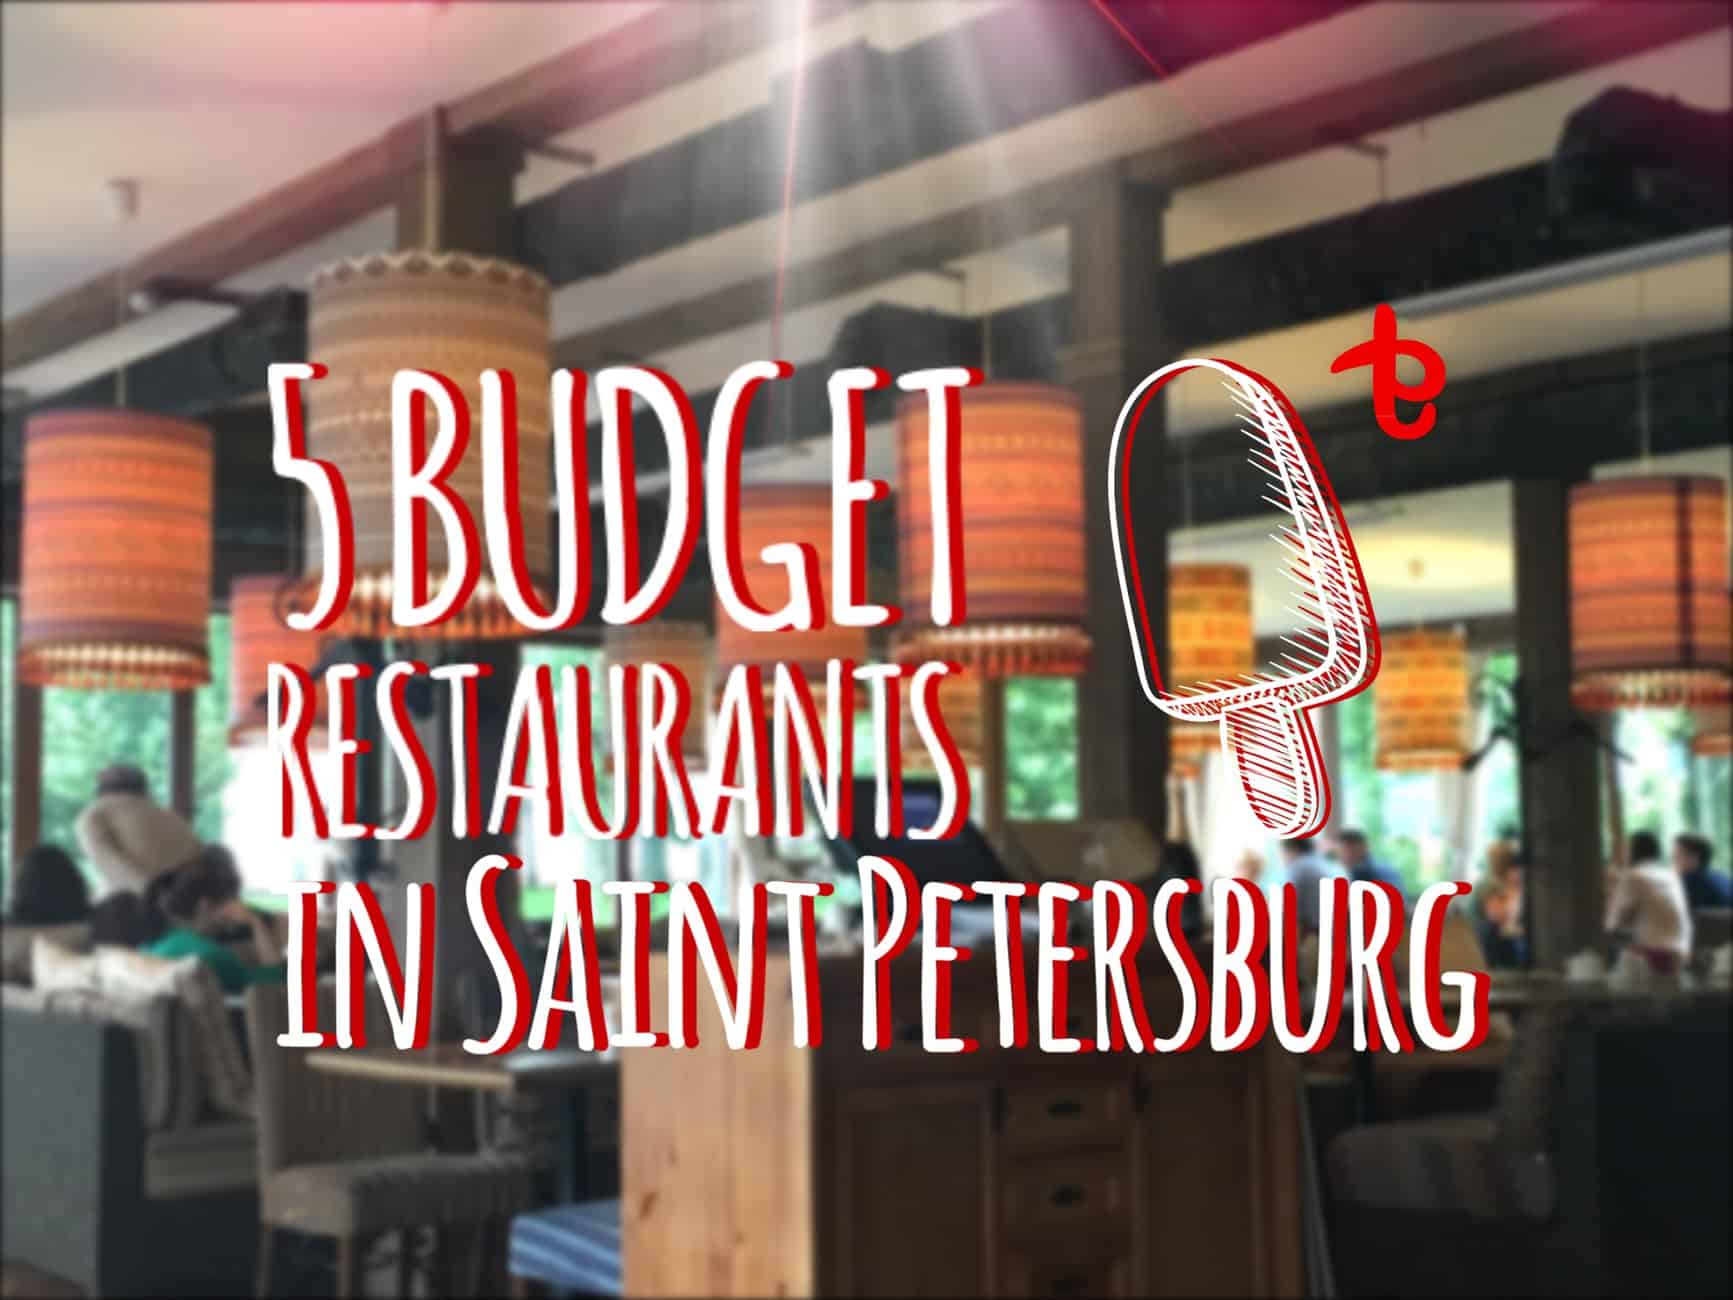 Places to eat in St. Petersburg